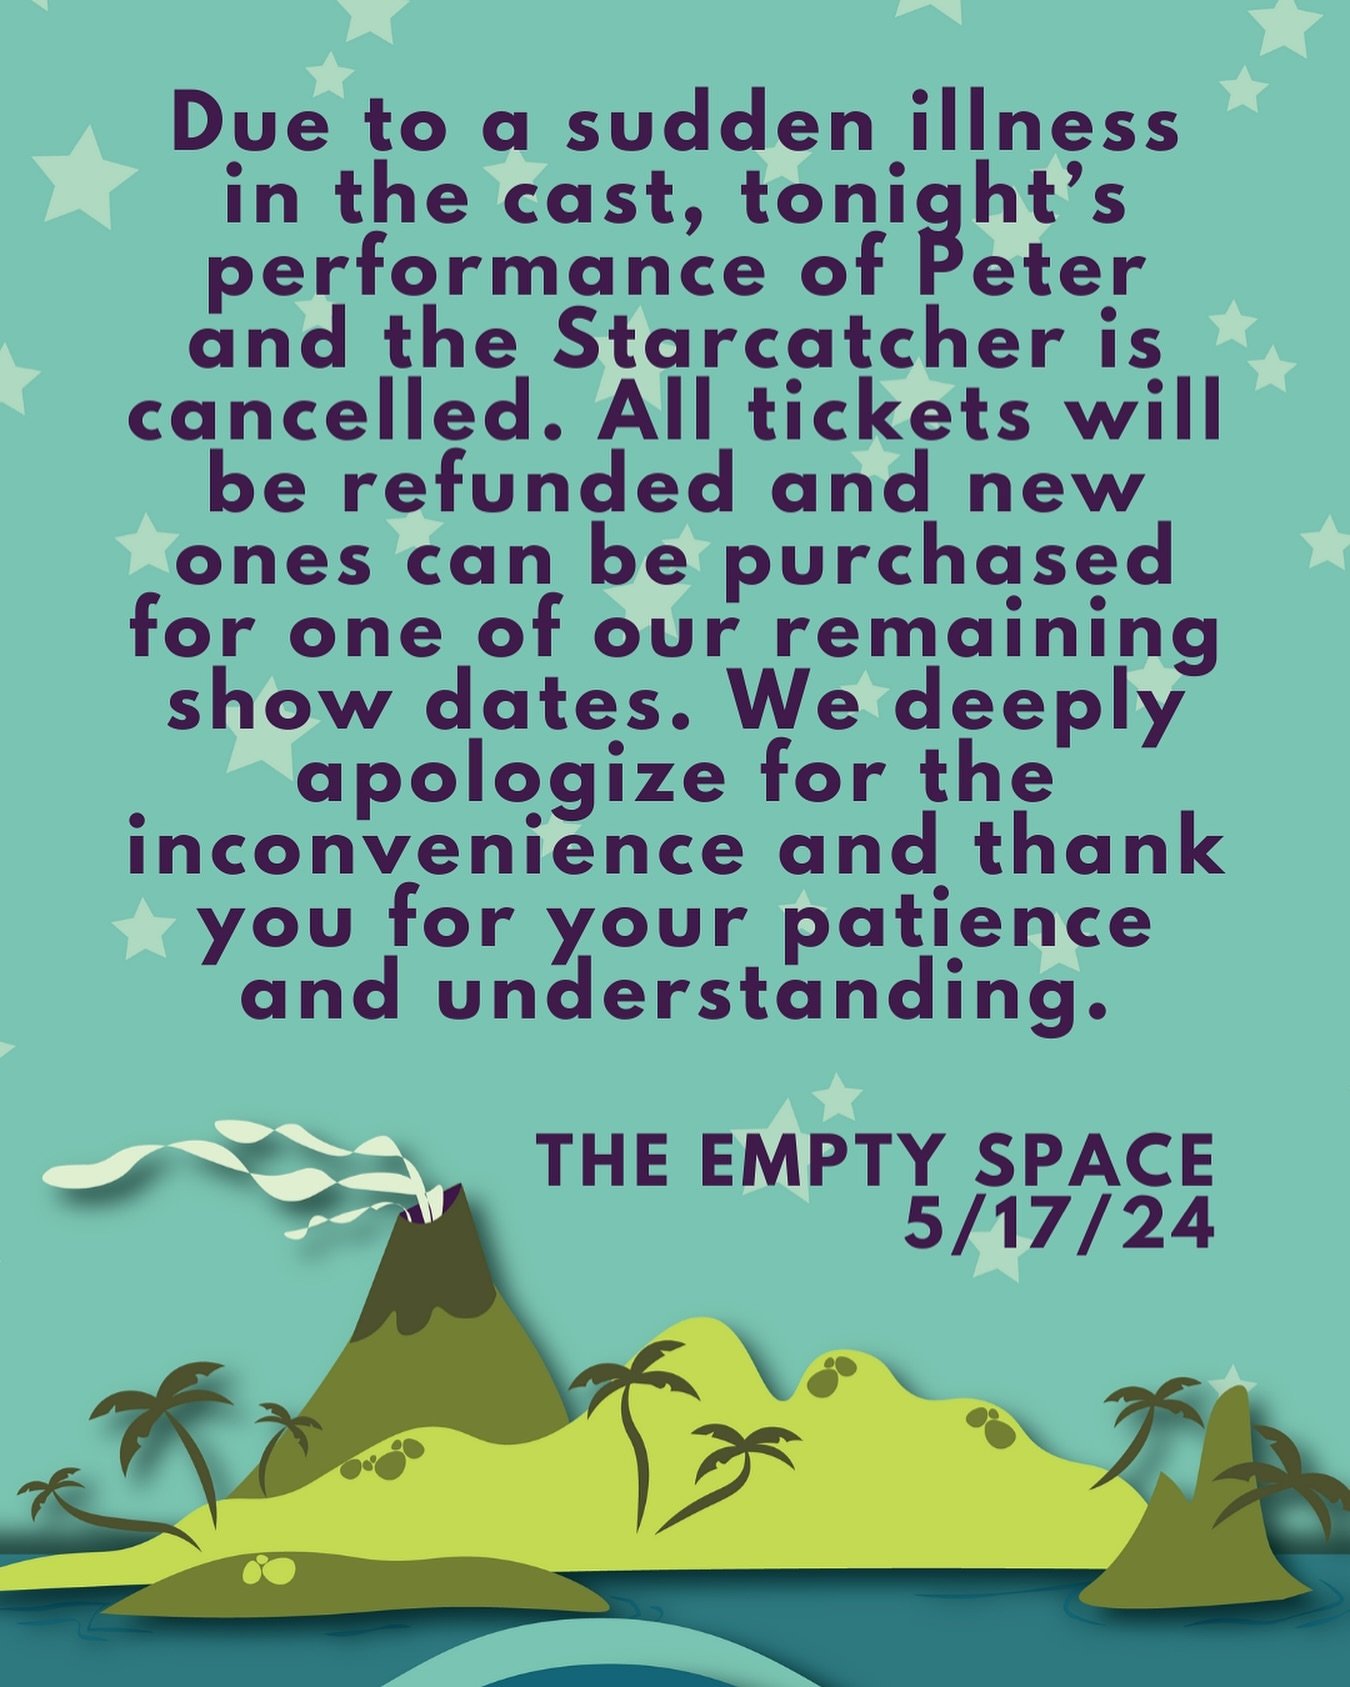 Due to a sudden illness in the cast, tonight&rsquo;s performance of Peter and the Starcatcher is cancelled. All tickets will be refunded and new ones can be purchased for one of our remaining show dates. We deeply apologize for the inconvenience and 